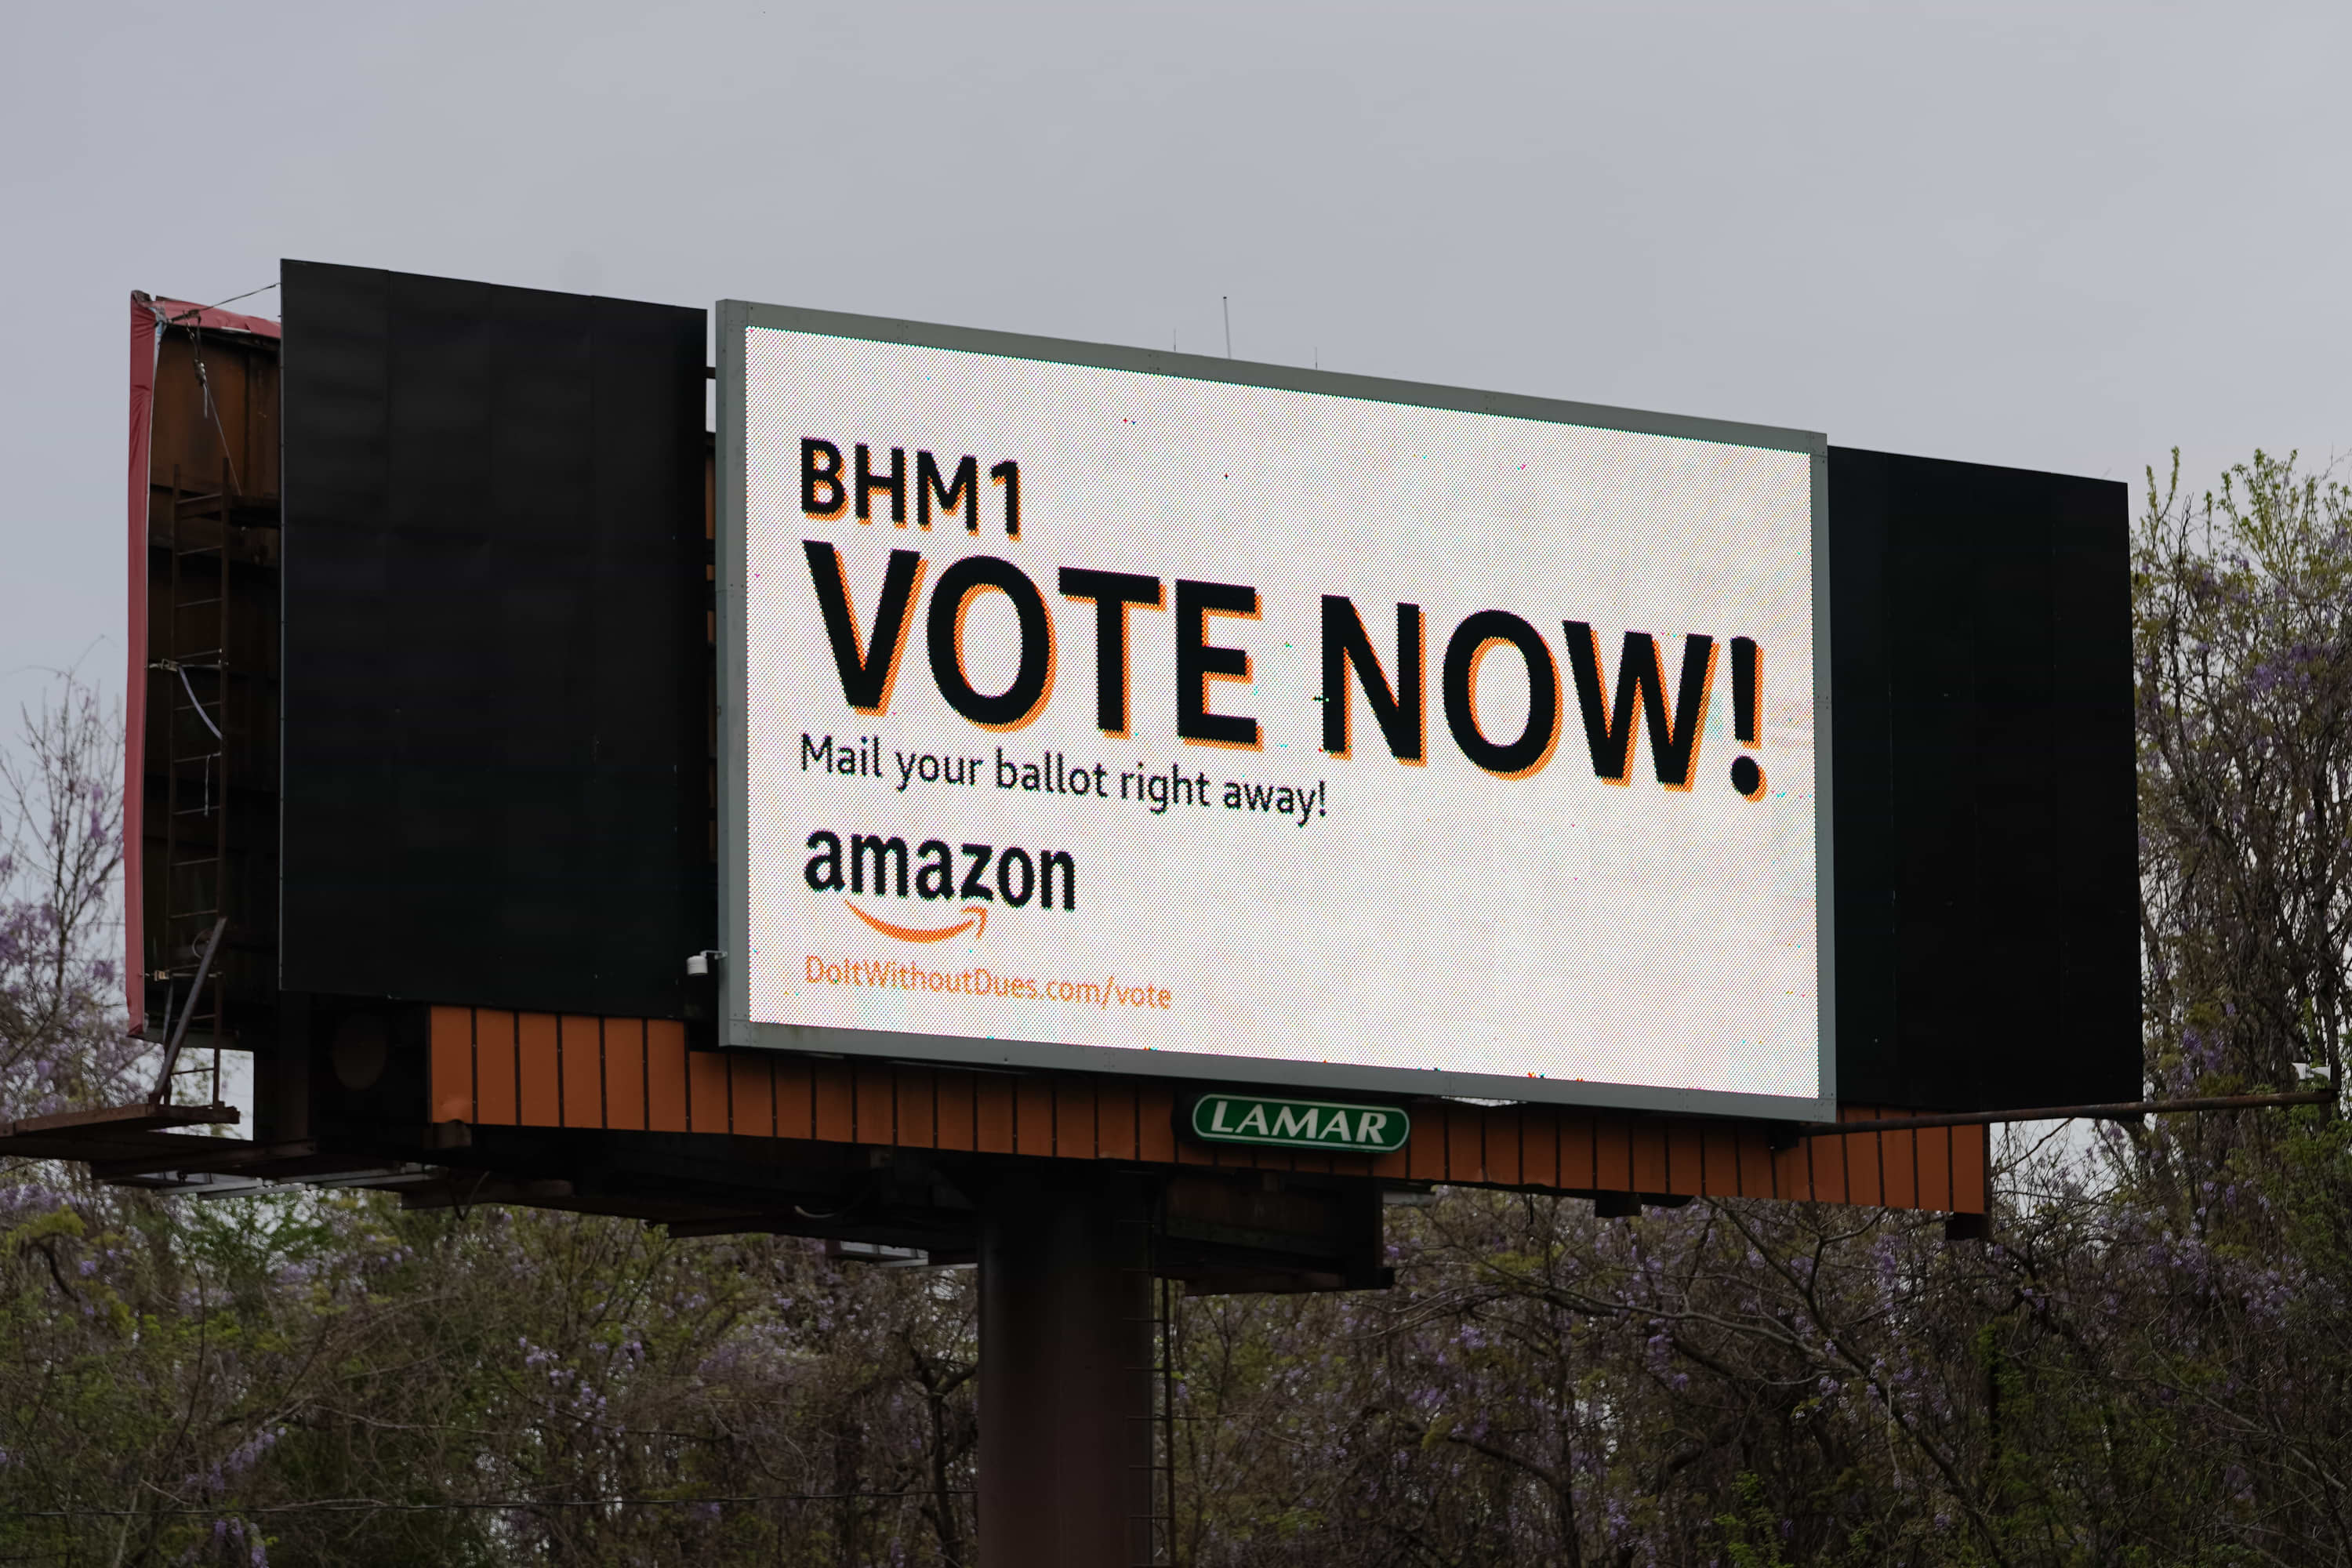 Amazon will face another high-stakes union election at its warehouse in Bessemer, Alabama, in early February, a federal labor agency said Tuesday. The